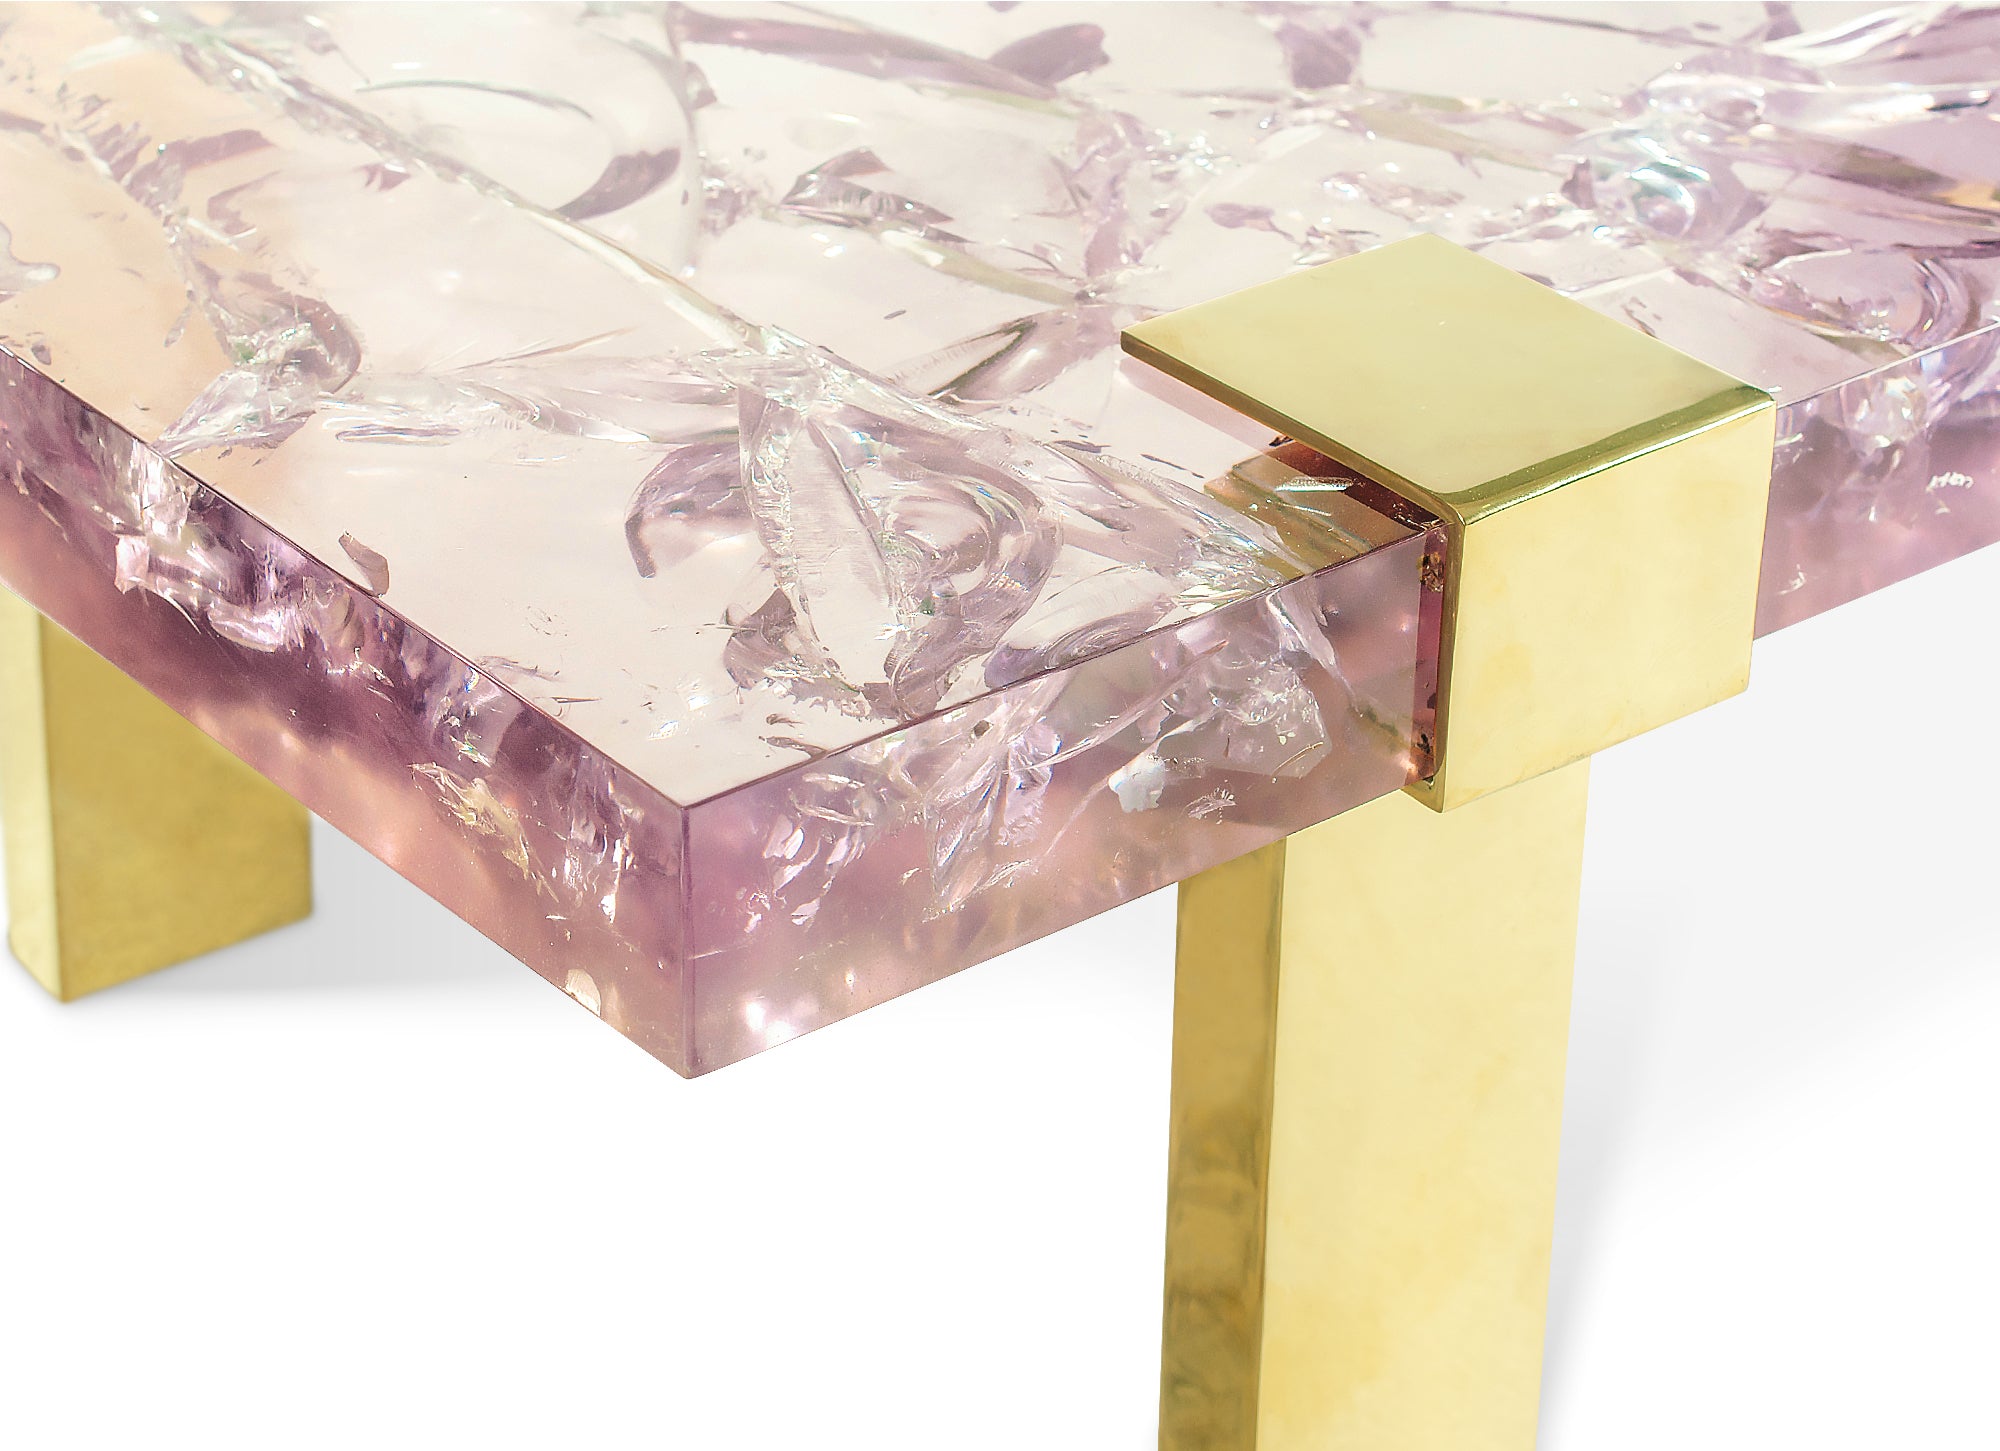 Clasp Coffee Table Ice Cracked Resin